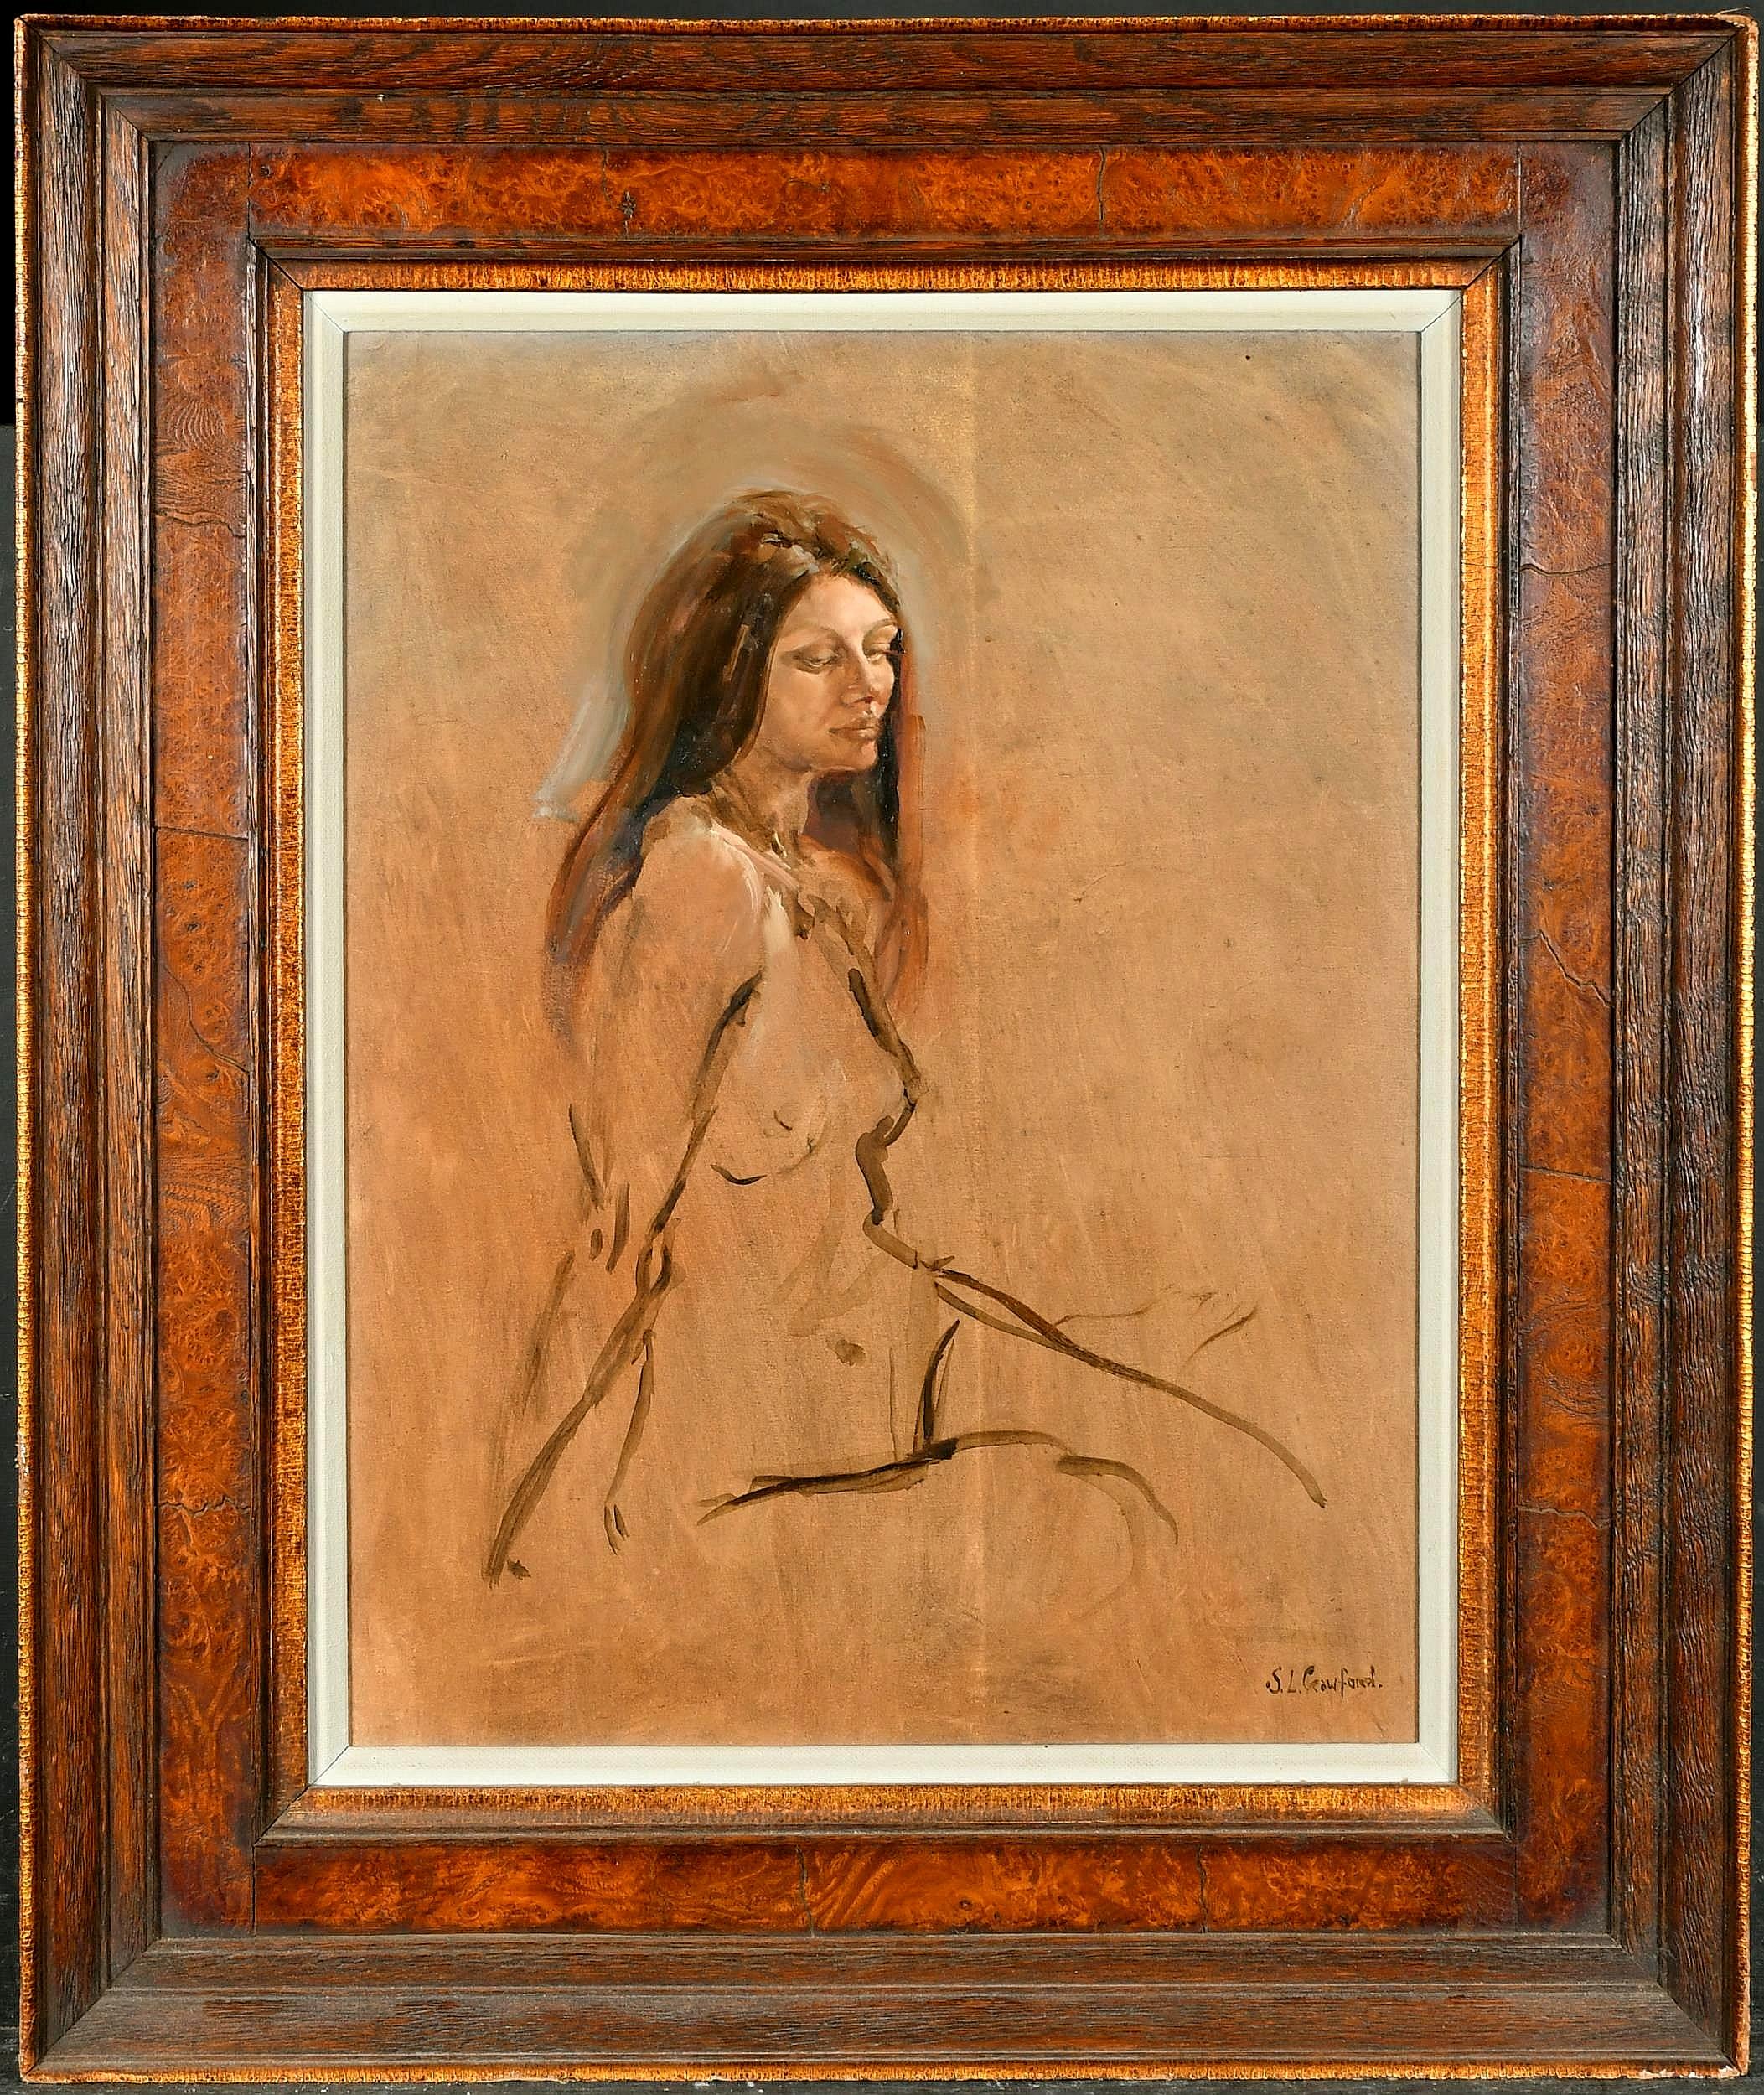 Nude Sitting - Fine Nude Portrait of a Lady, Modern English Oil Painting